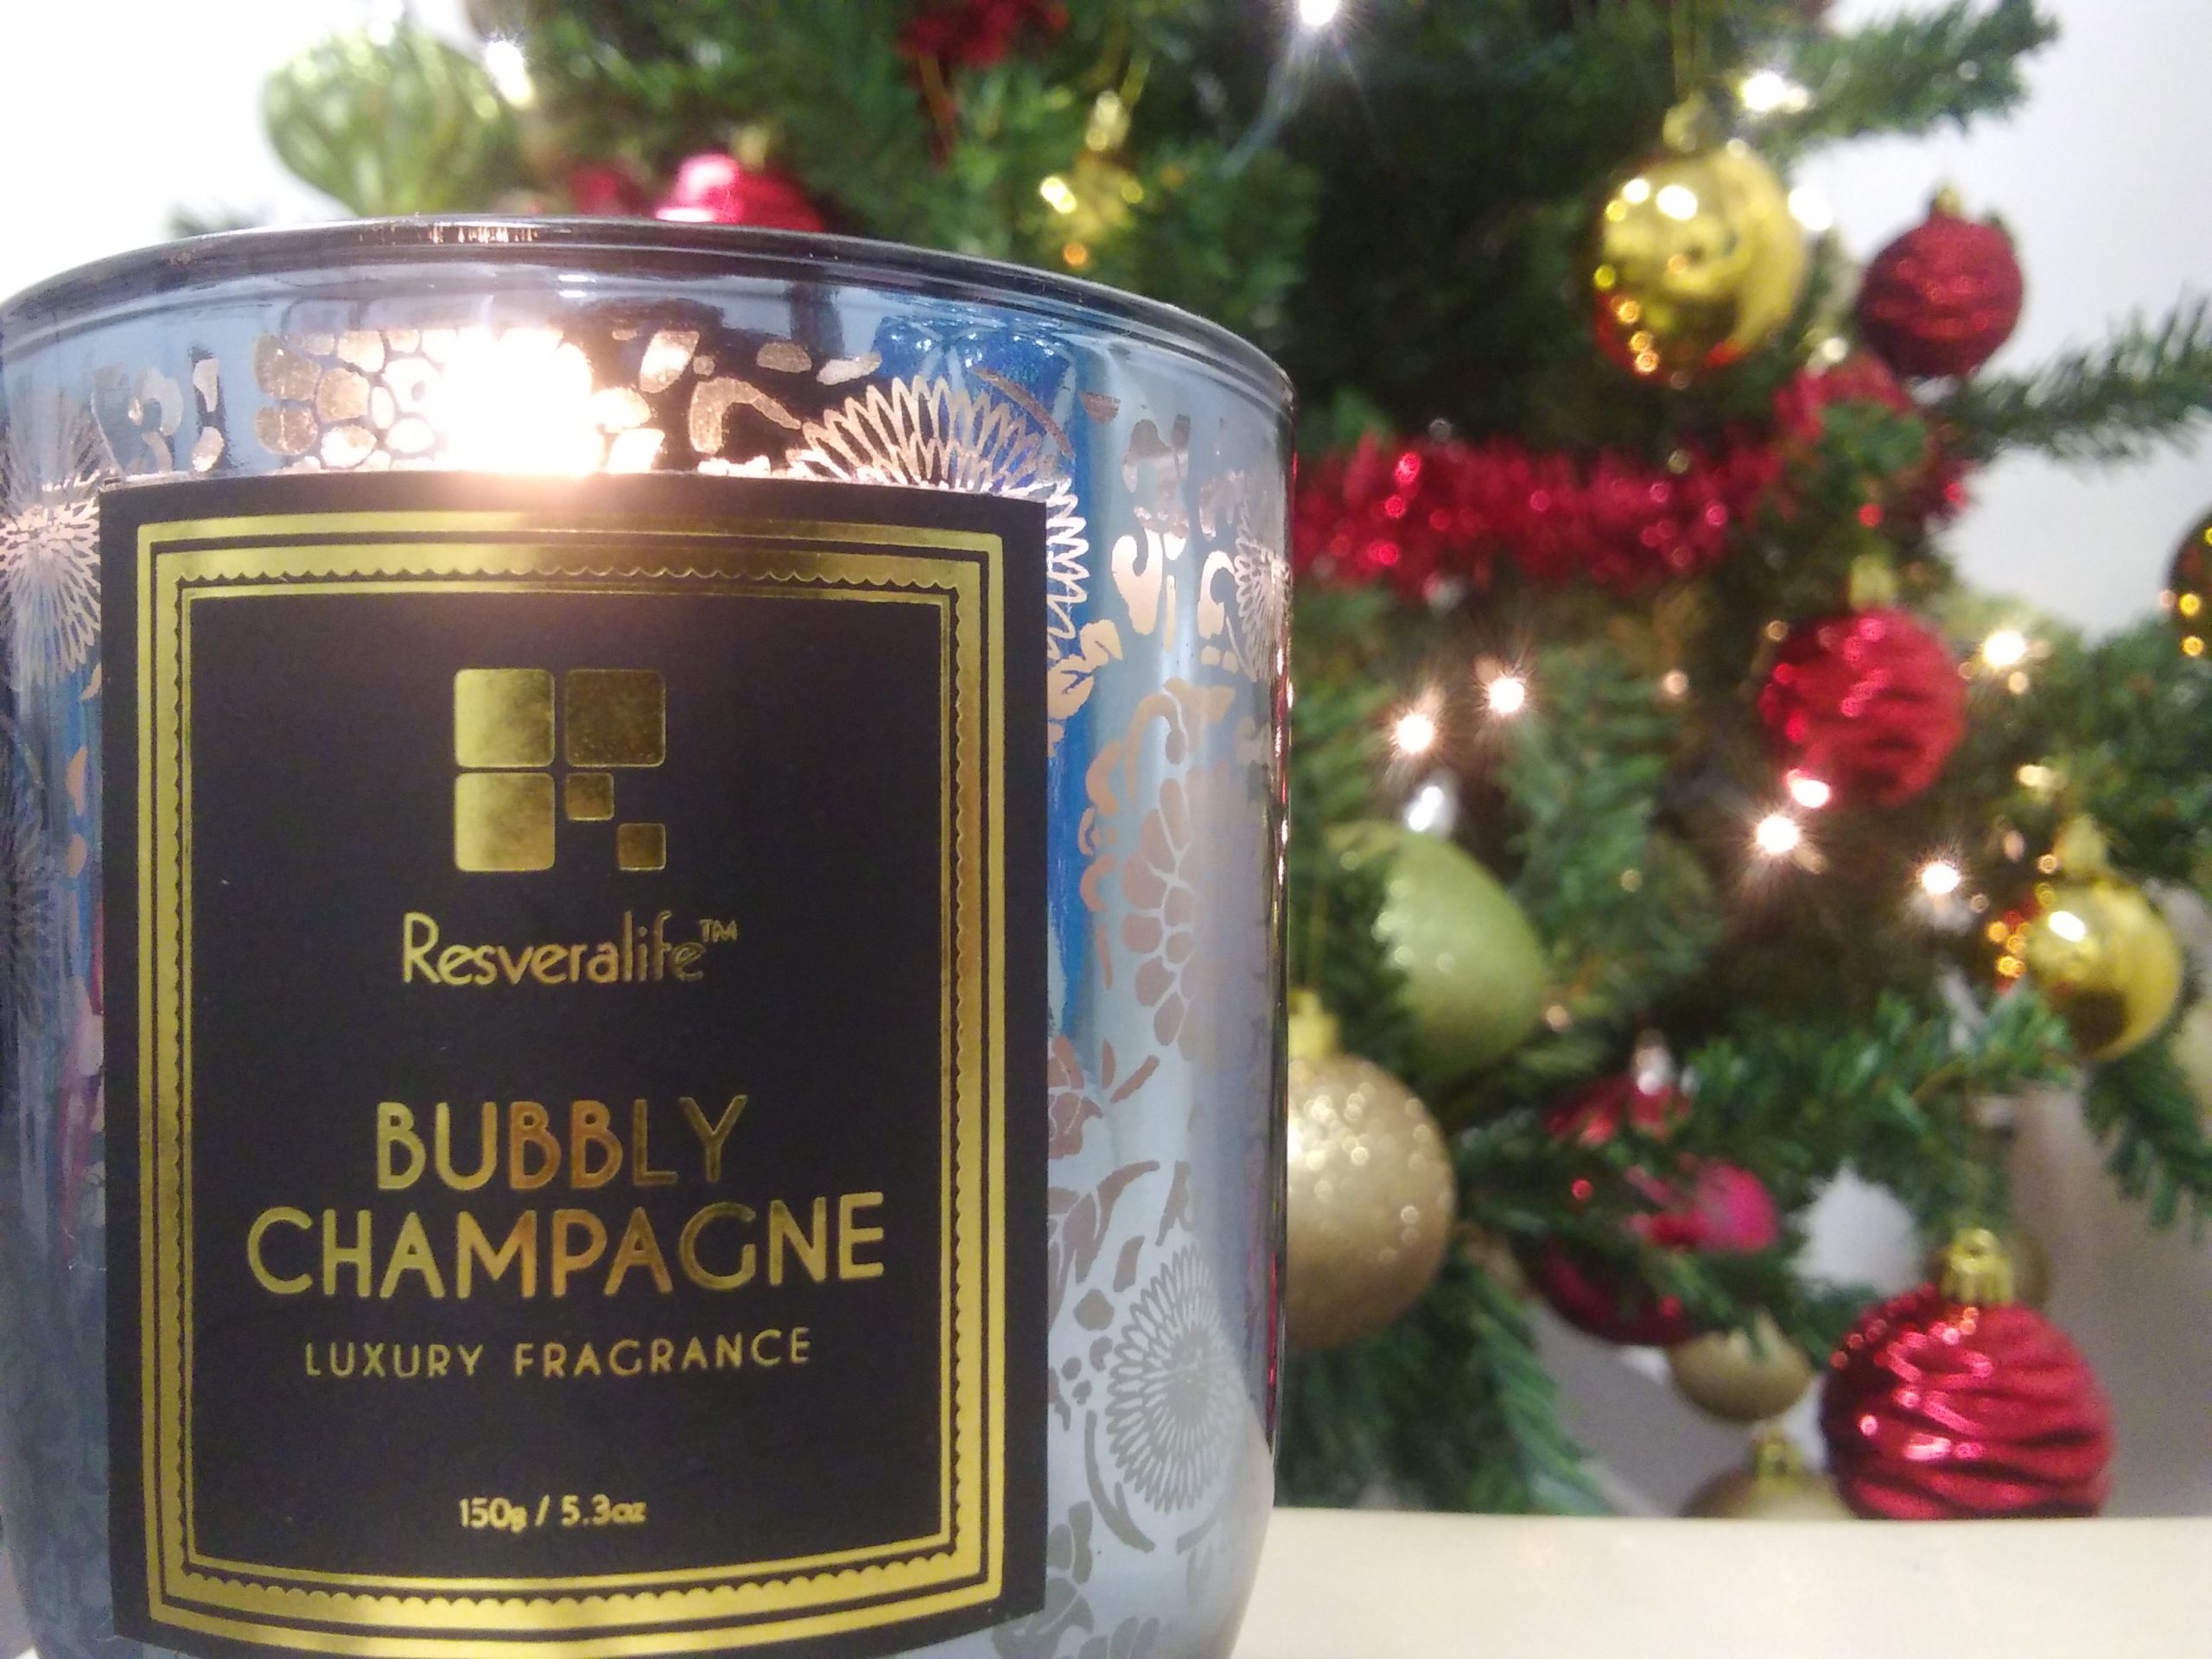 Resveralife Bubbly Champagne Candle in holiday setting